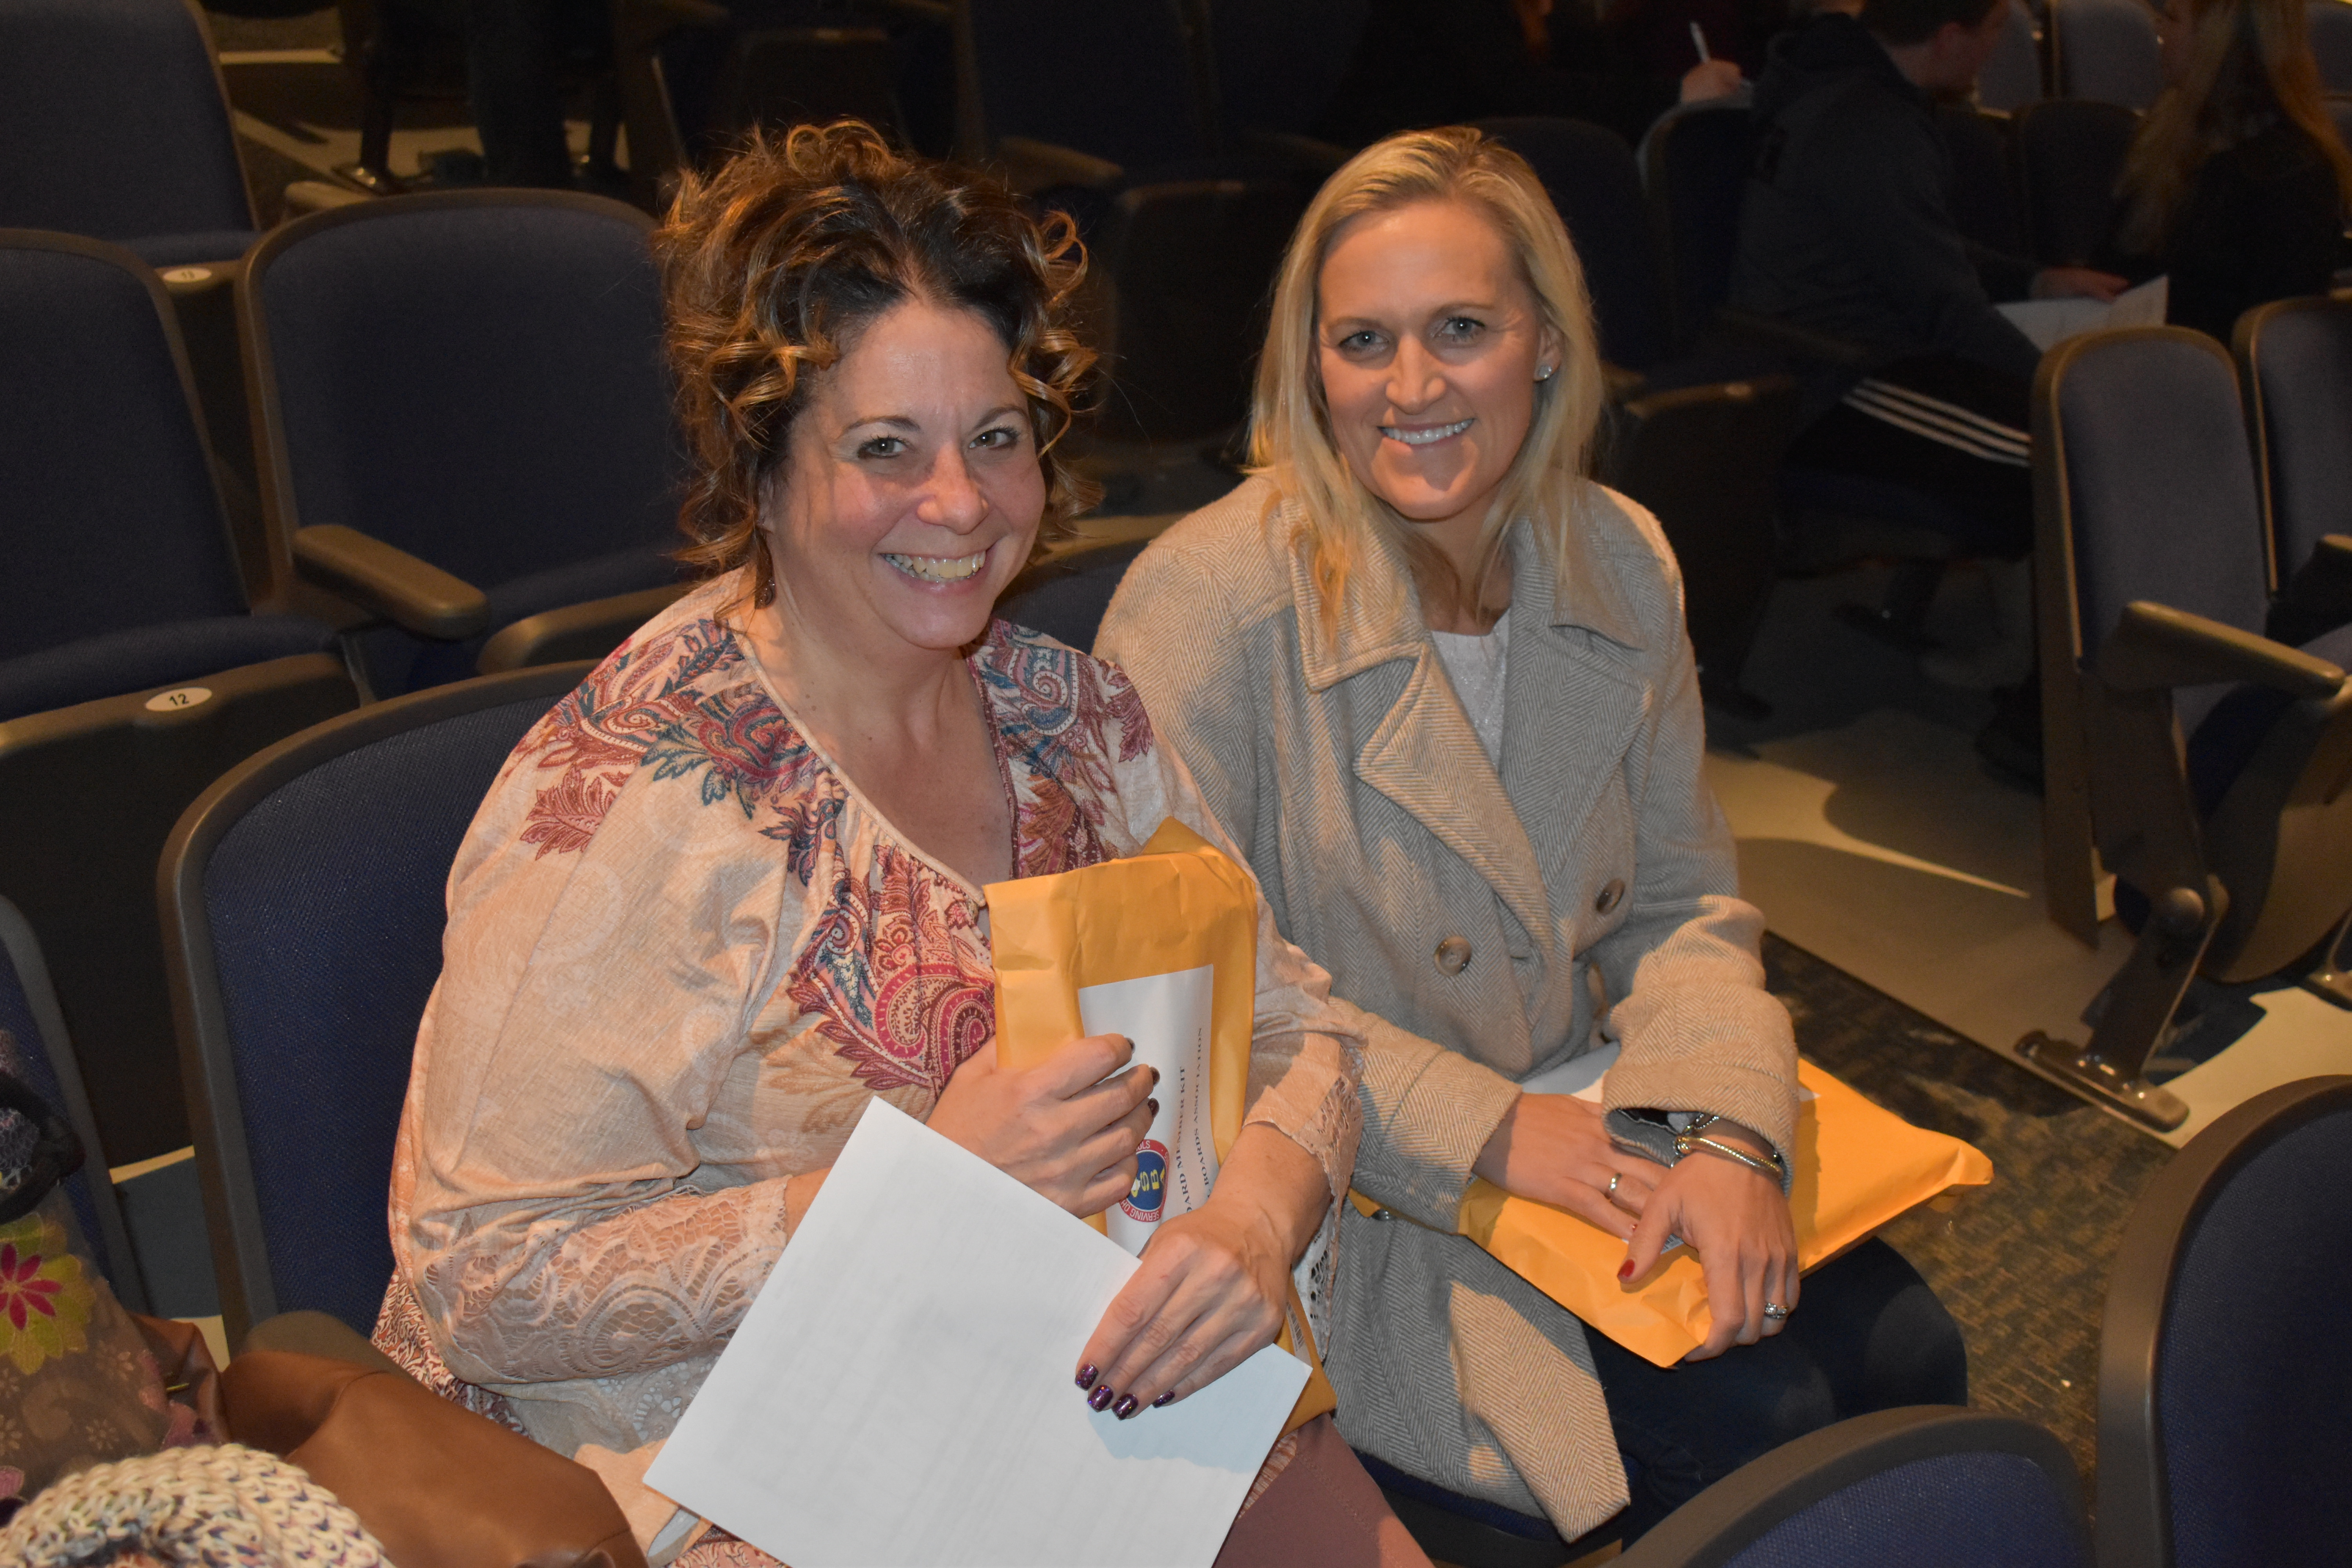 Melissa Sydlowski, left, and Sarah Kurpe are shown at the November meeting of the Brookfield Board of Education, the first one following their elections to the board. The ladies will be sworn in in January.